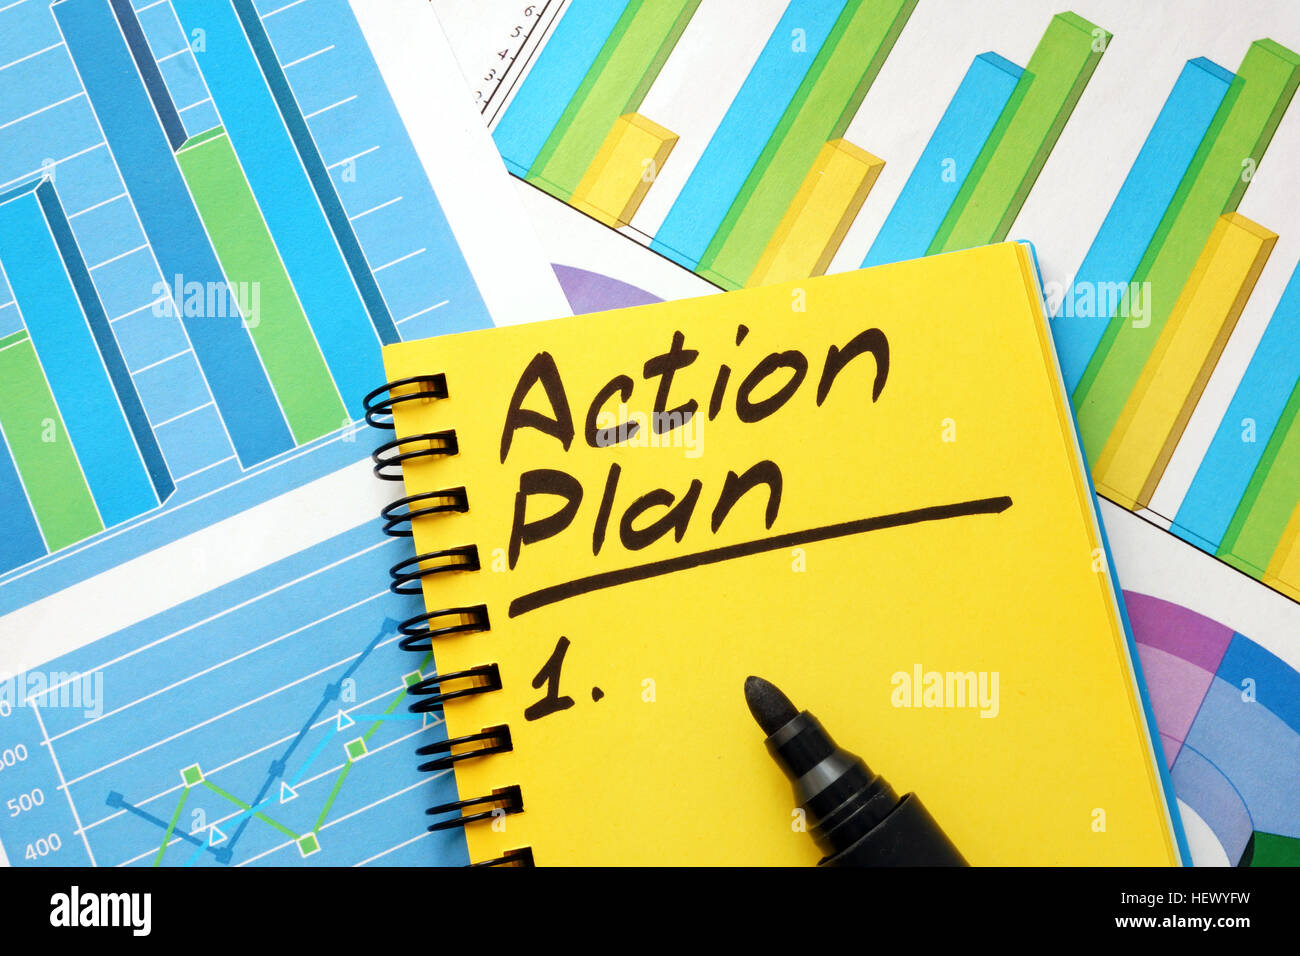 Action plan list in a note and financial charts. Stock Photo